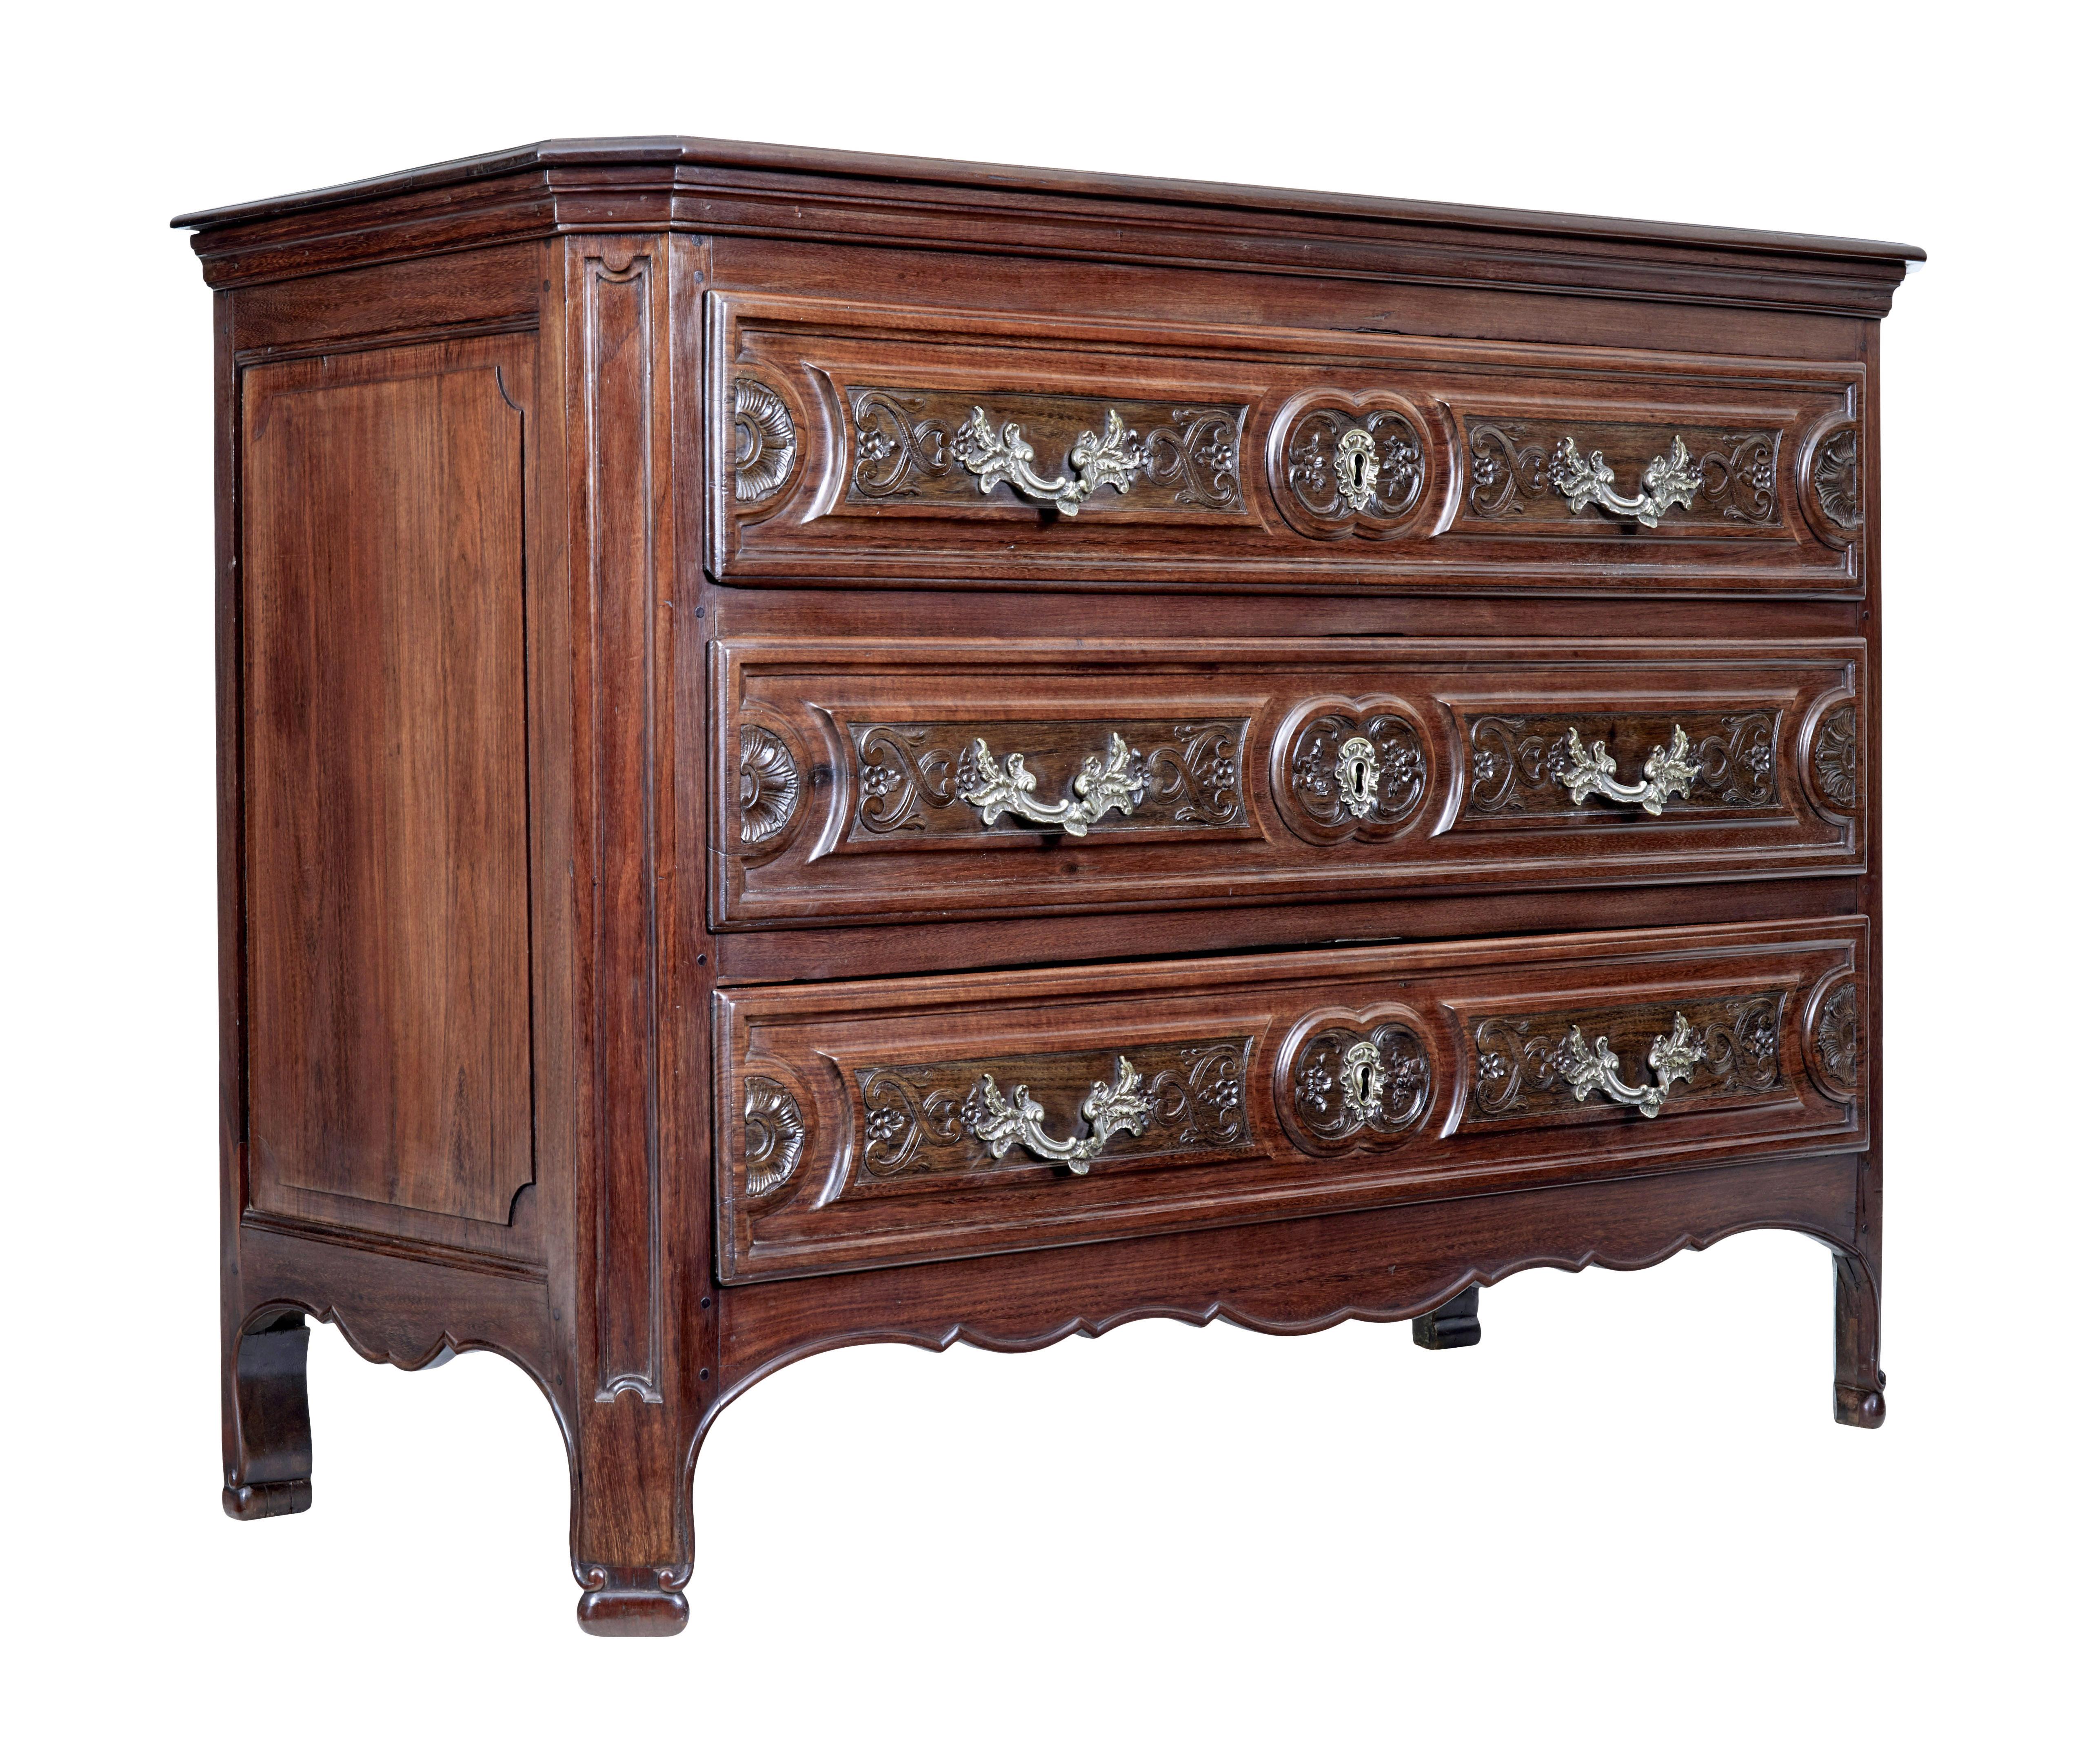 Carved walnut 19th century french provincial commode circa 1850.

Stunning example of a mid-19th century french walnut provincial commode. 3 drawers with profusely carved in rosewood inserts. Fitted with original ornate handles and